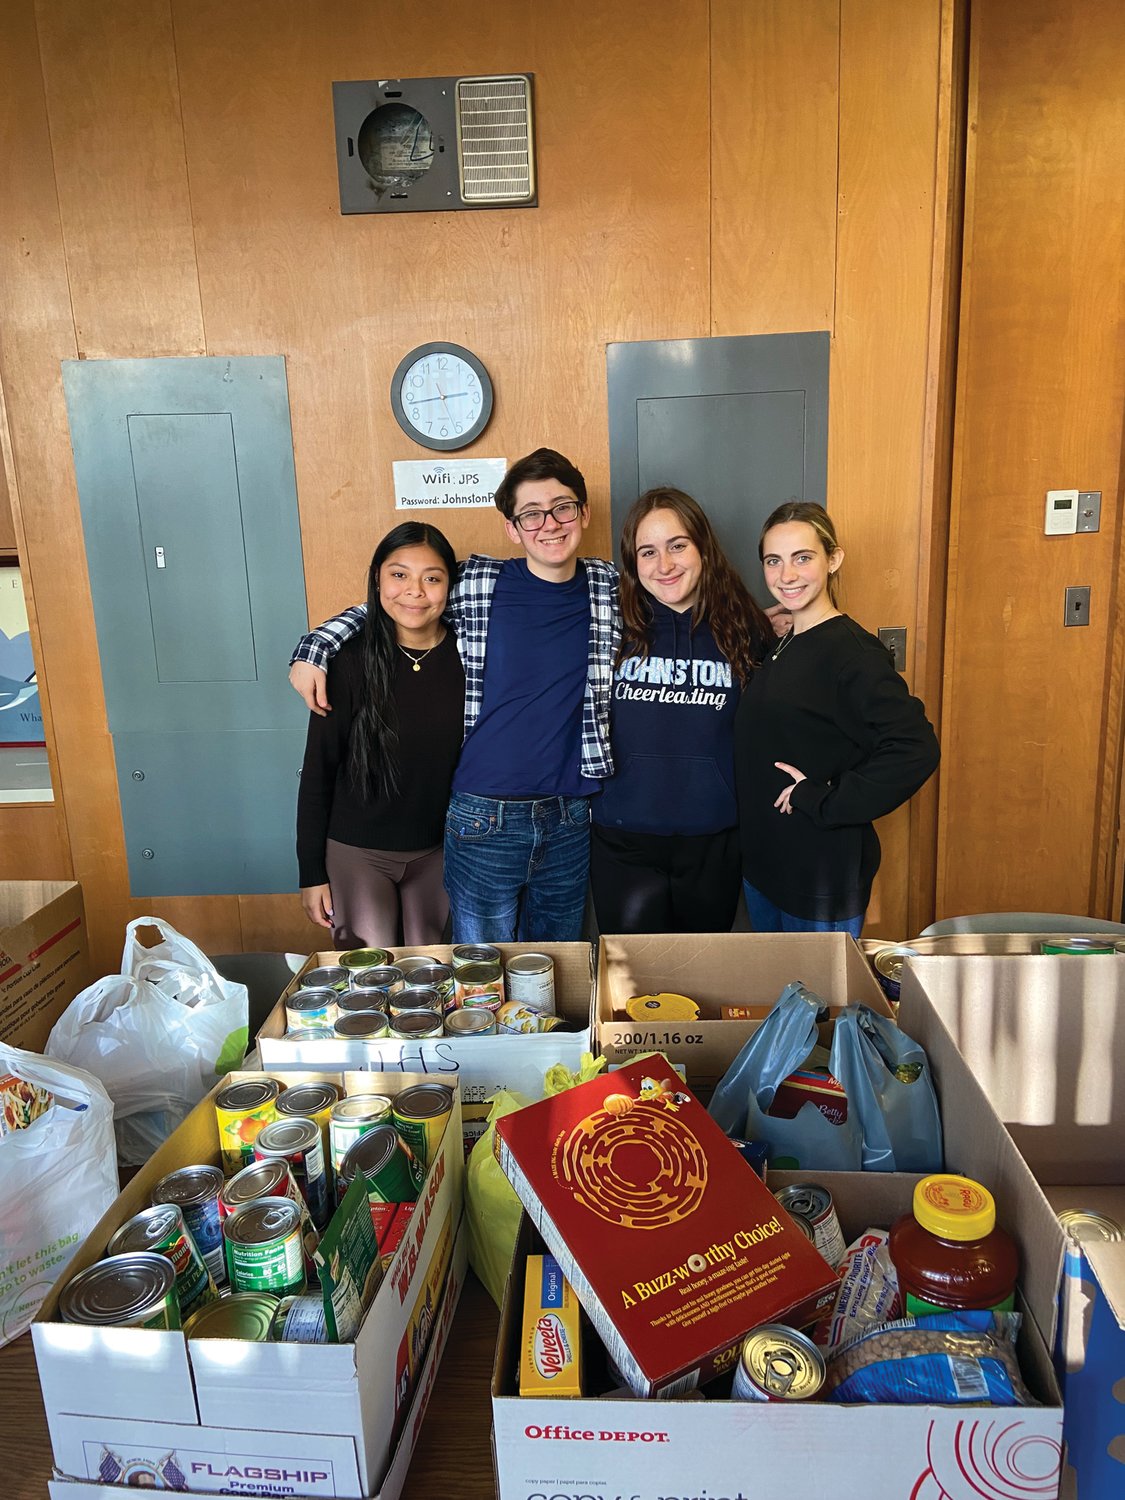 Members of SADD, President Charlie Curci, Vice President Rachel Ixcotoyac, Senior Class President Charlene Hohlmaier, and Senior Class Student Council Representative Janet Clements pose with the food collected for the food drive.